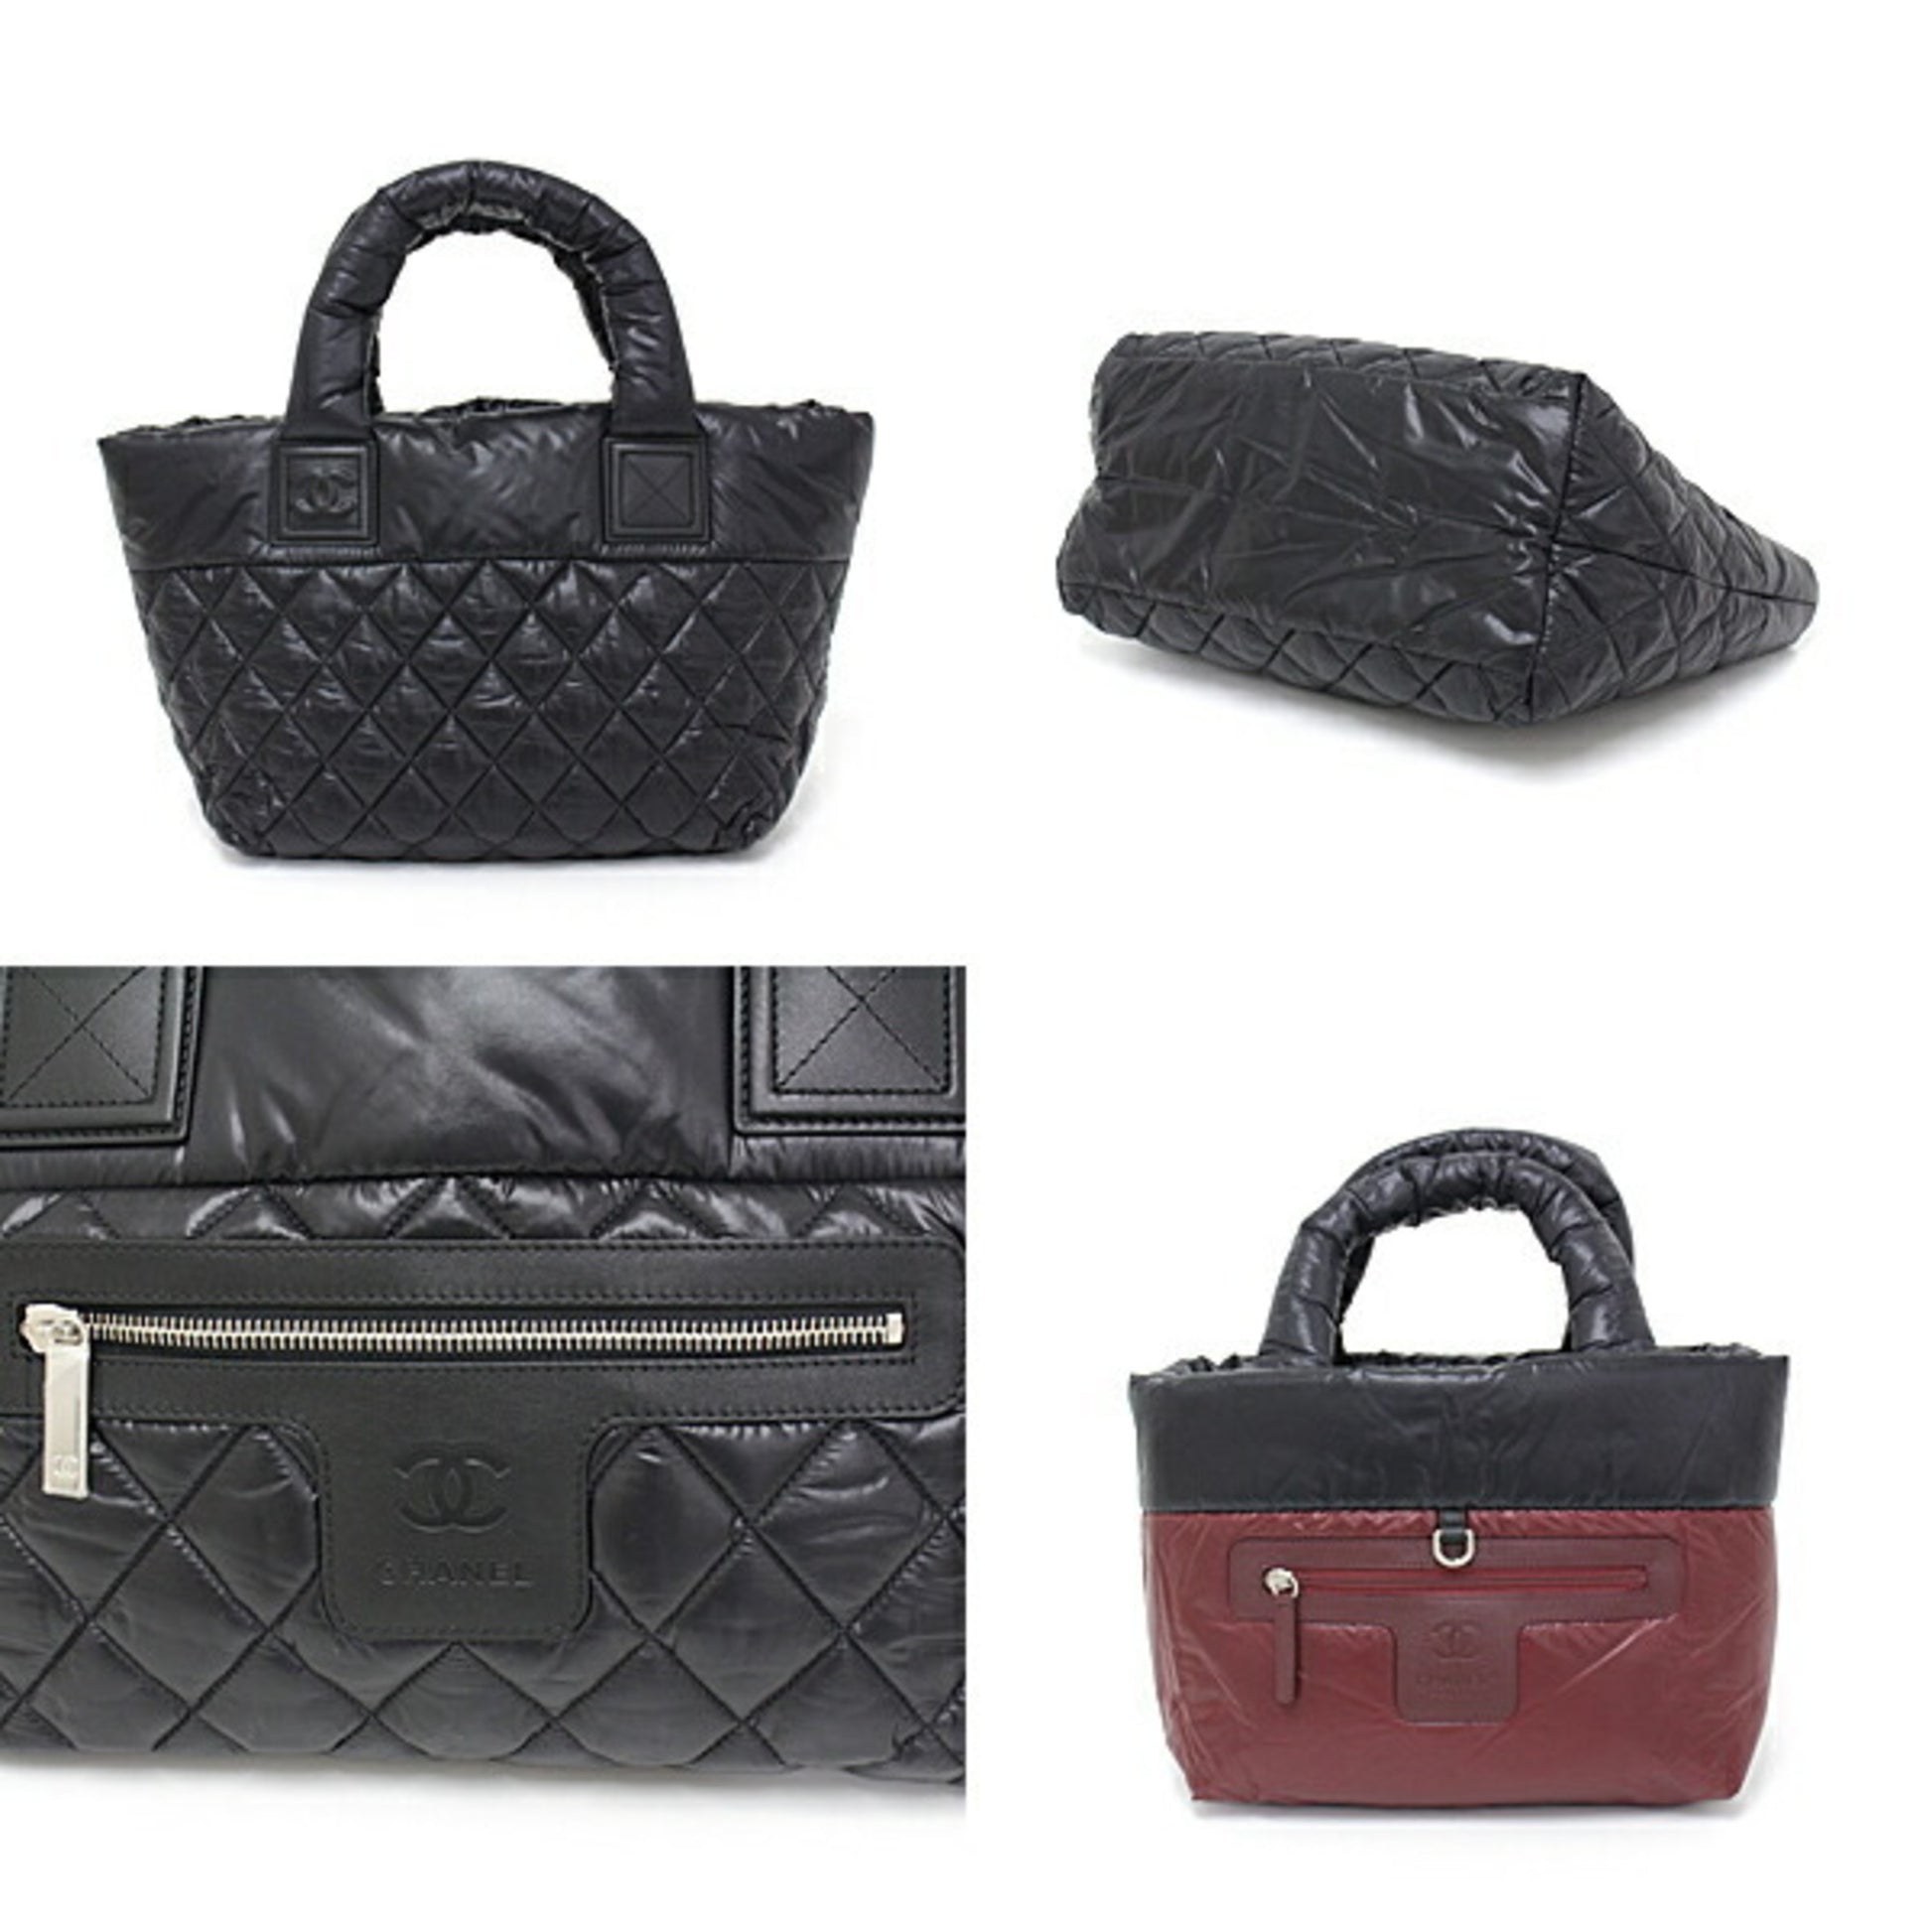 SET OF THREE BLACK/BURGUNDY PADDED NYLON COCO COCOON BAGS, CHANEL, A  Collection of a Lifetime: Chanel Online, Jewellery